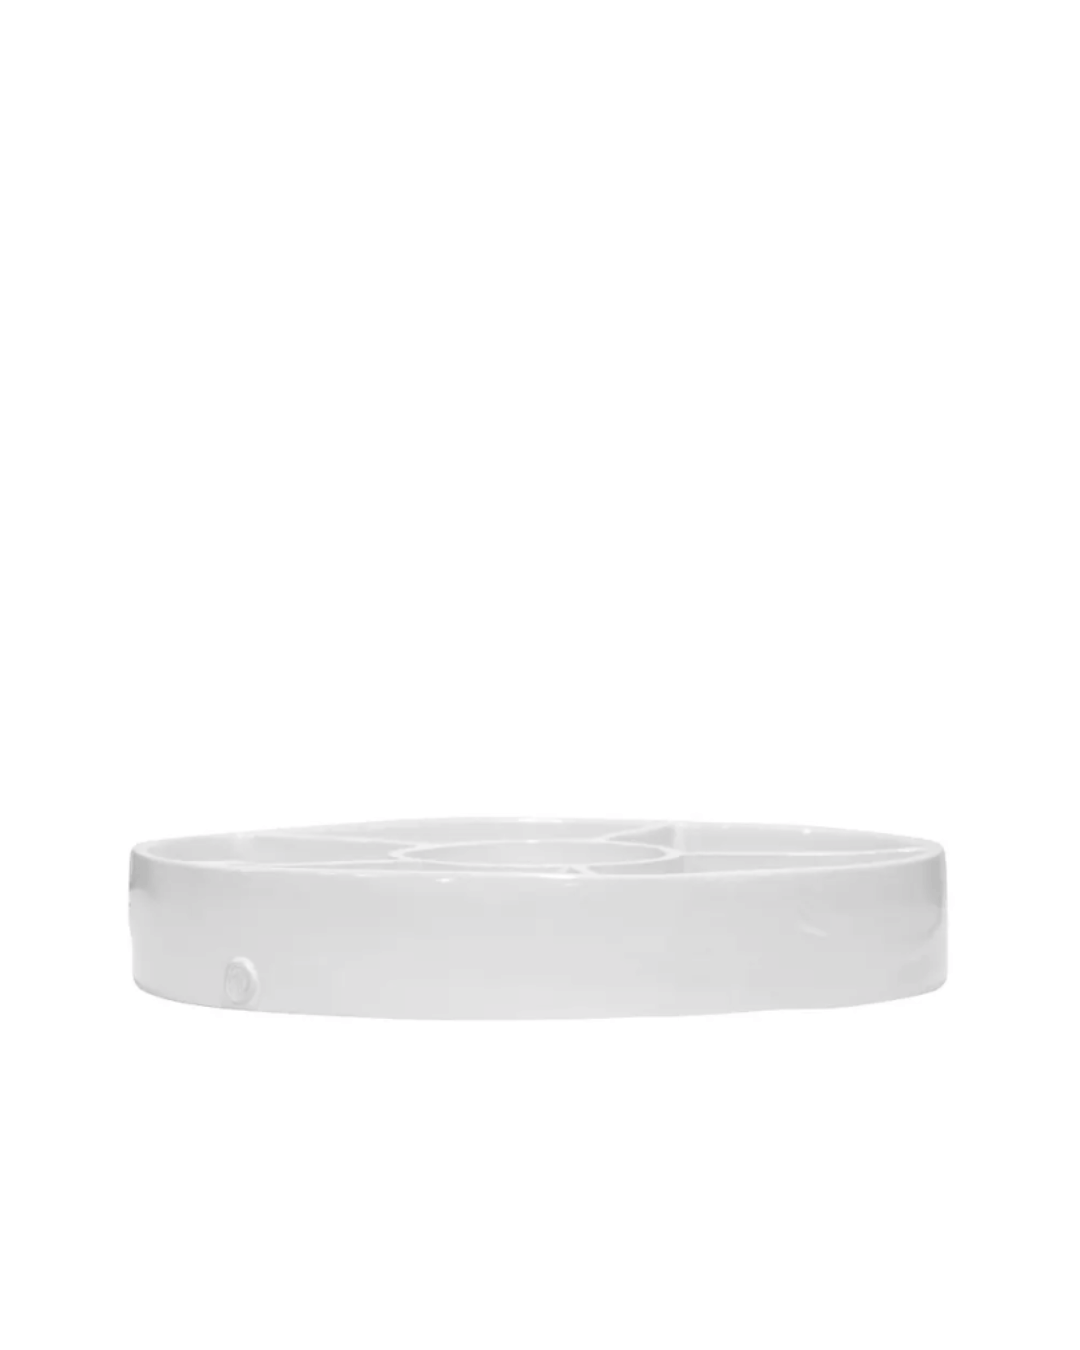 A simple, circular, white plastic Montes Doggett petri dish styled like an Arizona bungalow on a plain white background.